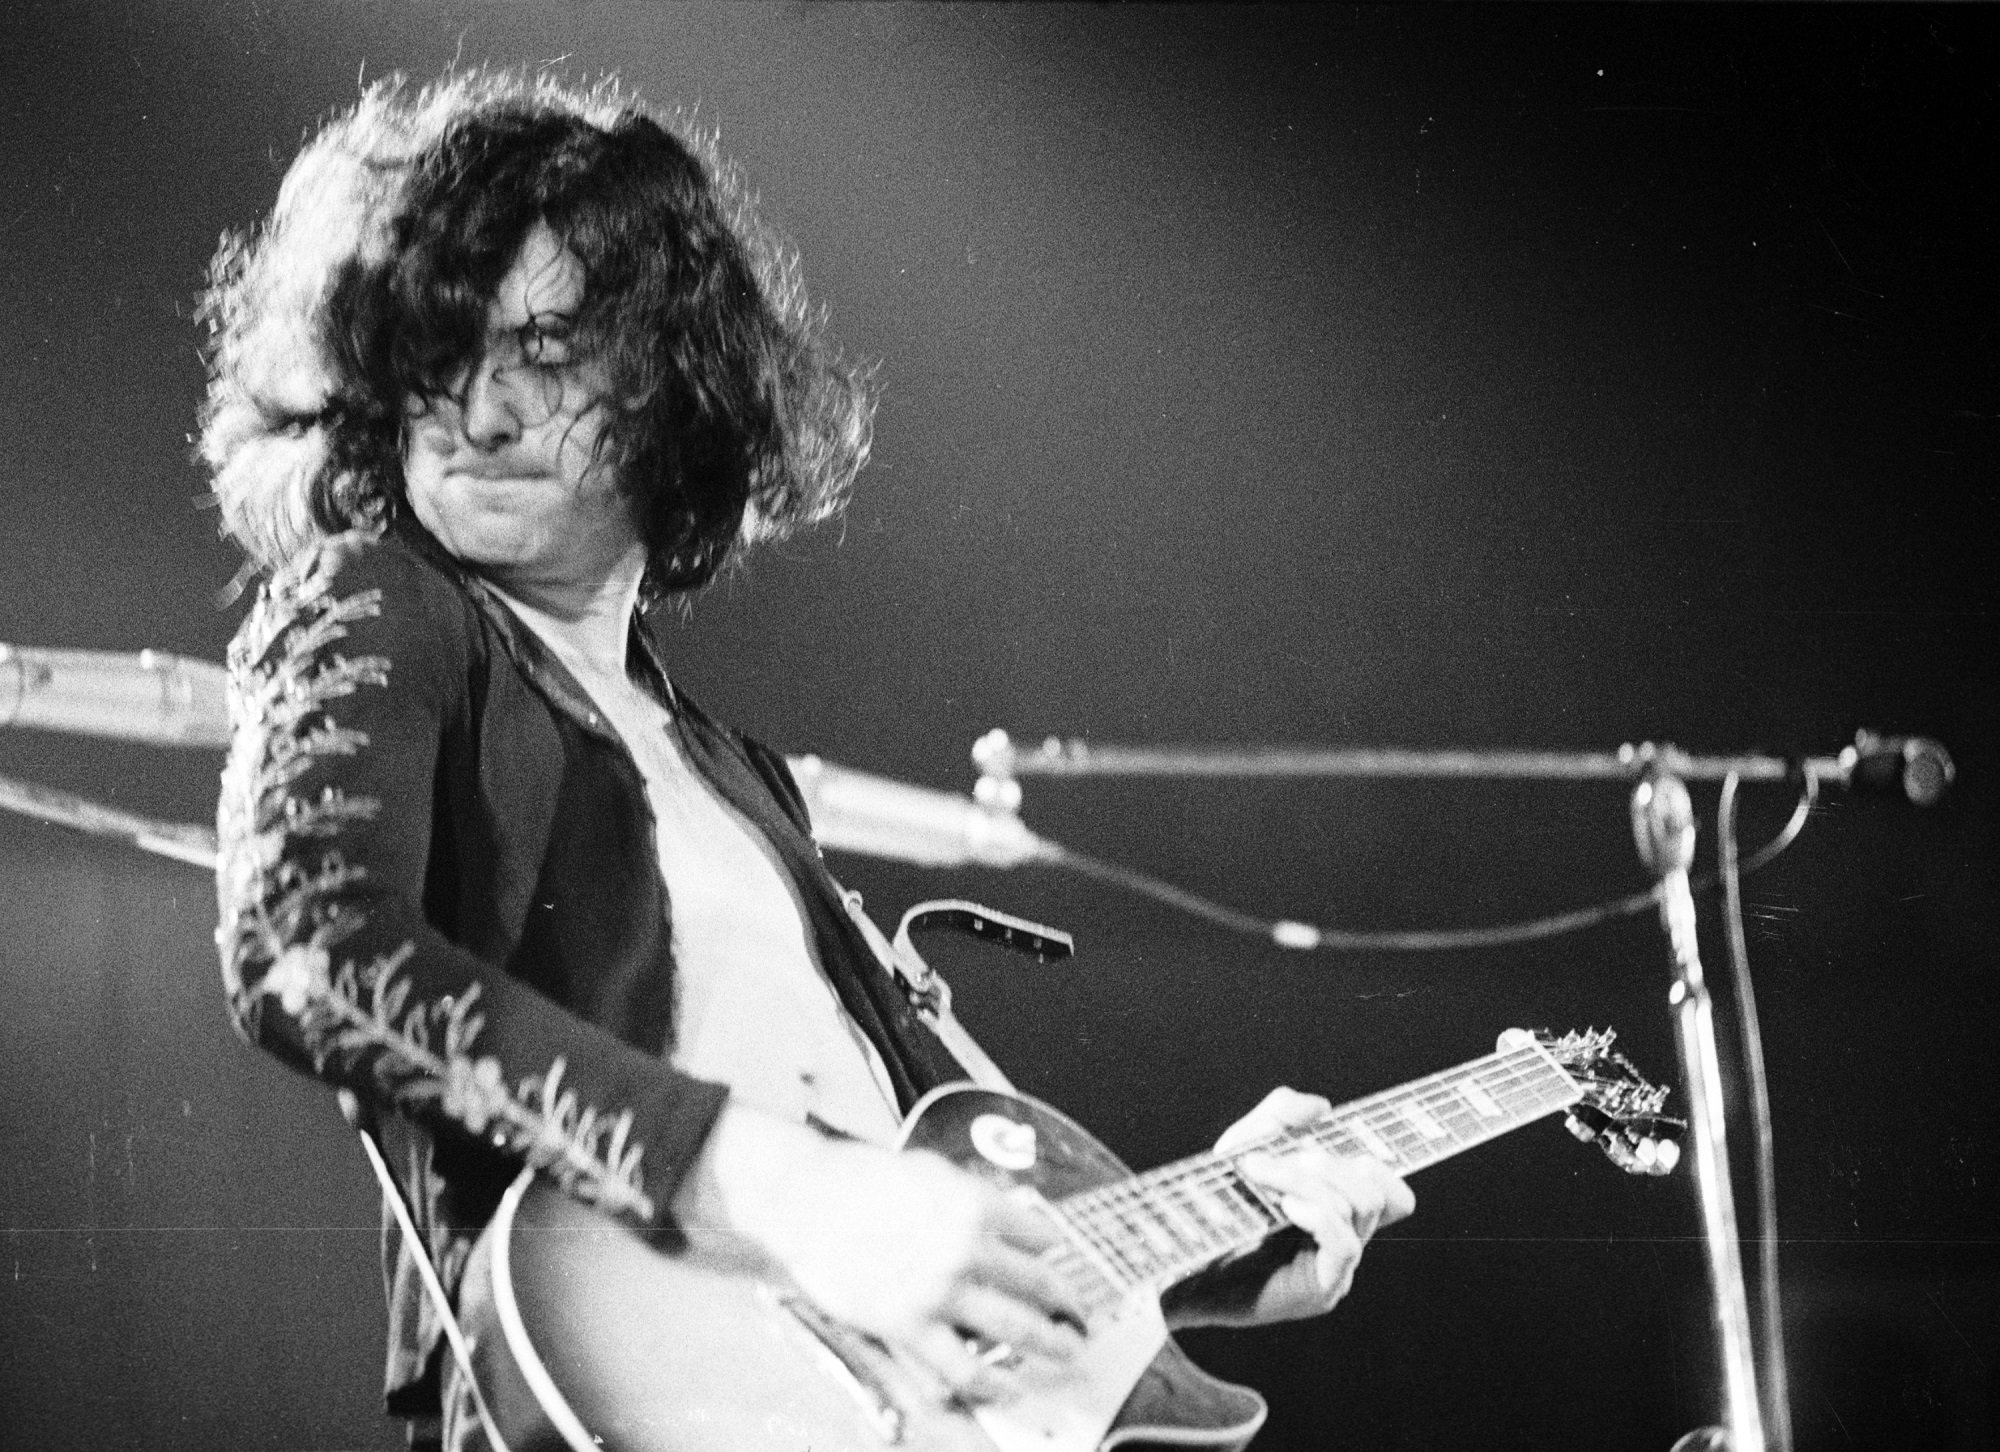 A black-and-white photo of Jimmy Page playing guitar on stage